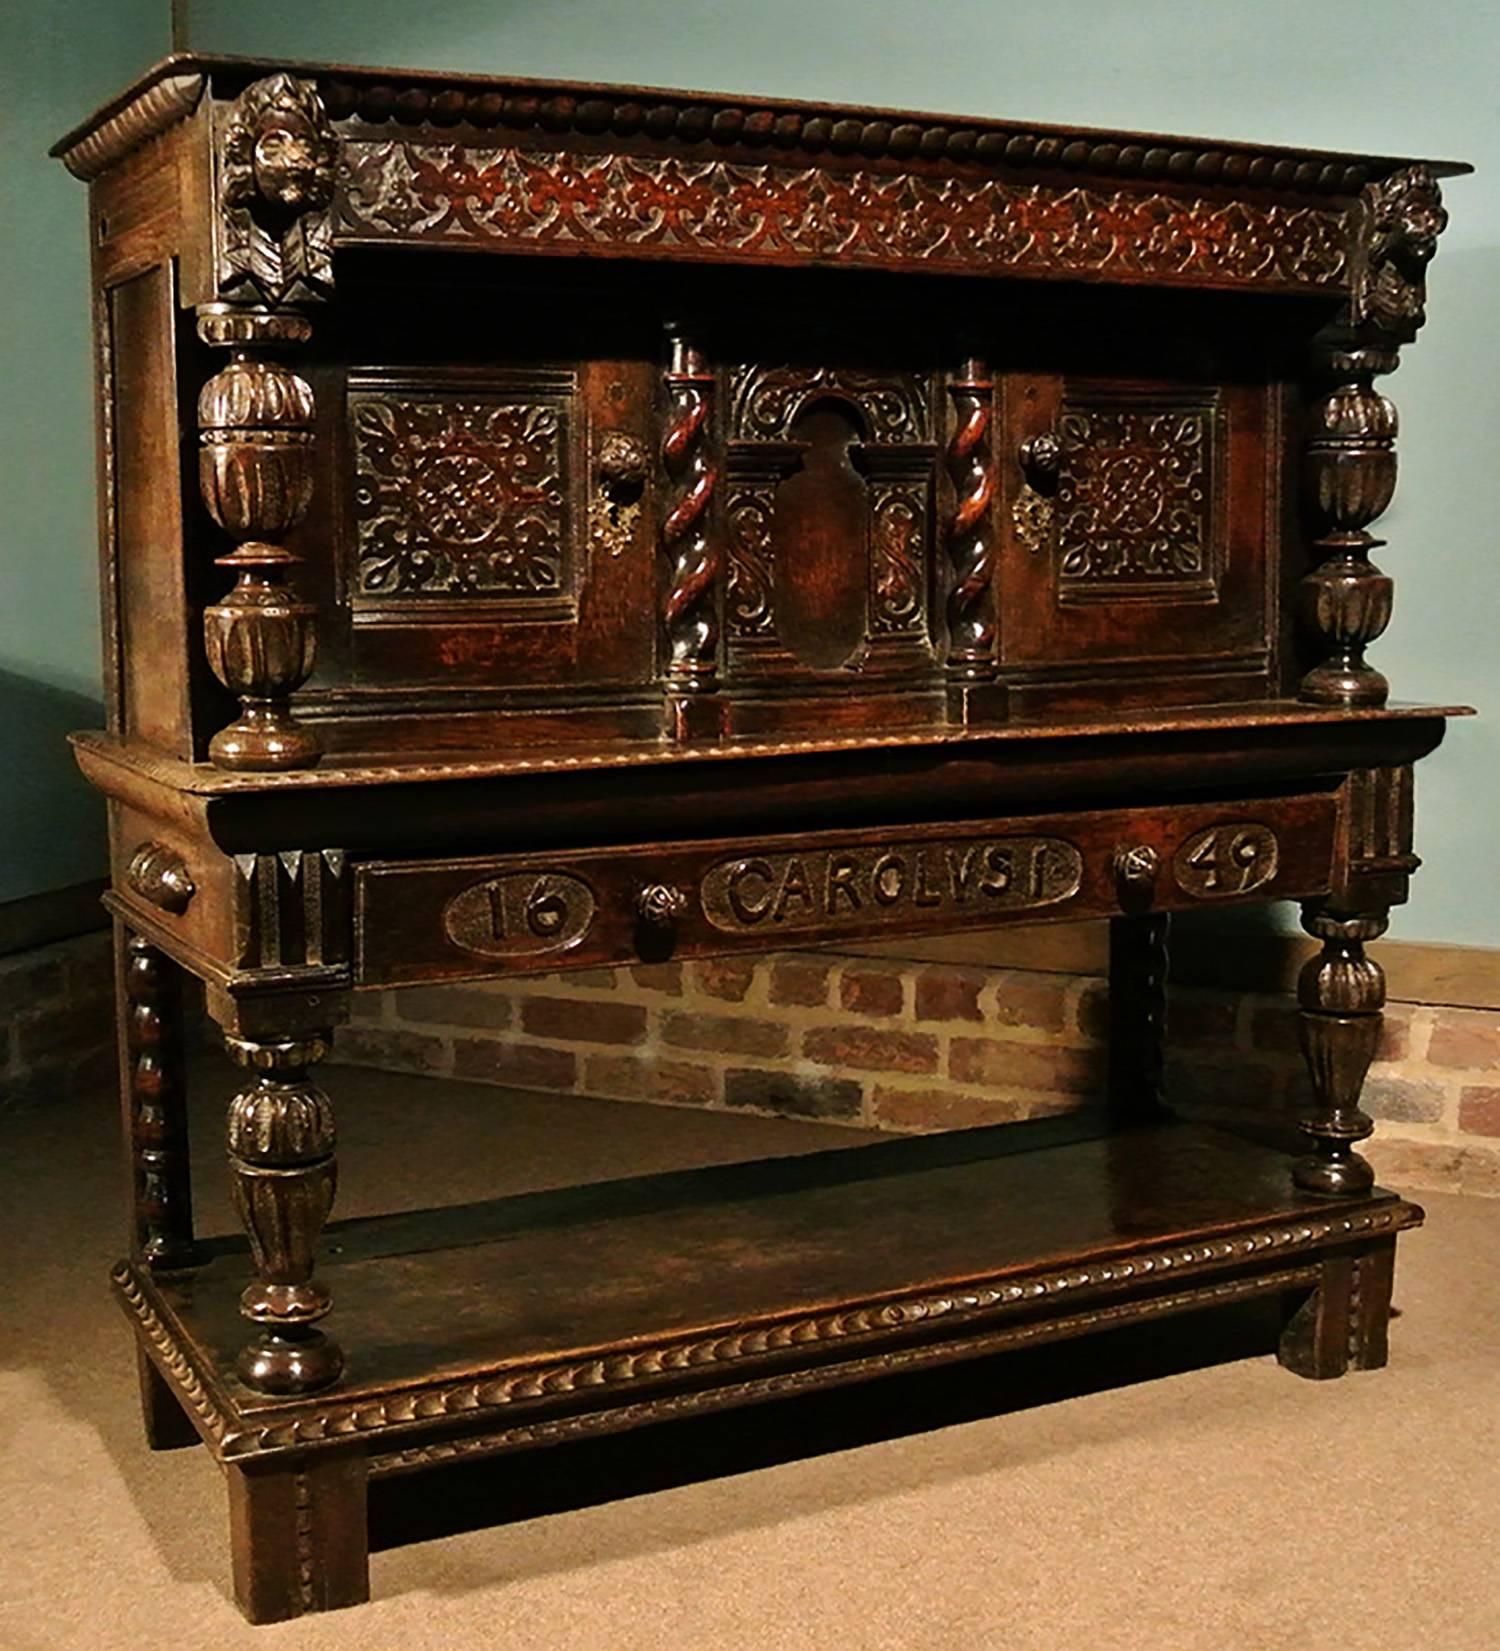 As rare as hens teeth! 

An exceptional joined oak livery cupboard dating from circa 1610. The drawer carved in 1649 in reverence to commemorate the beheading of Charles I (his name carved in the Latin, Carolus I, by a Royalist family hoping to